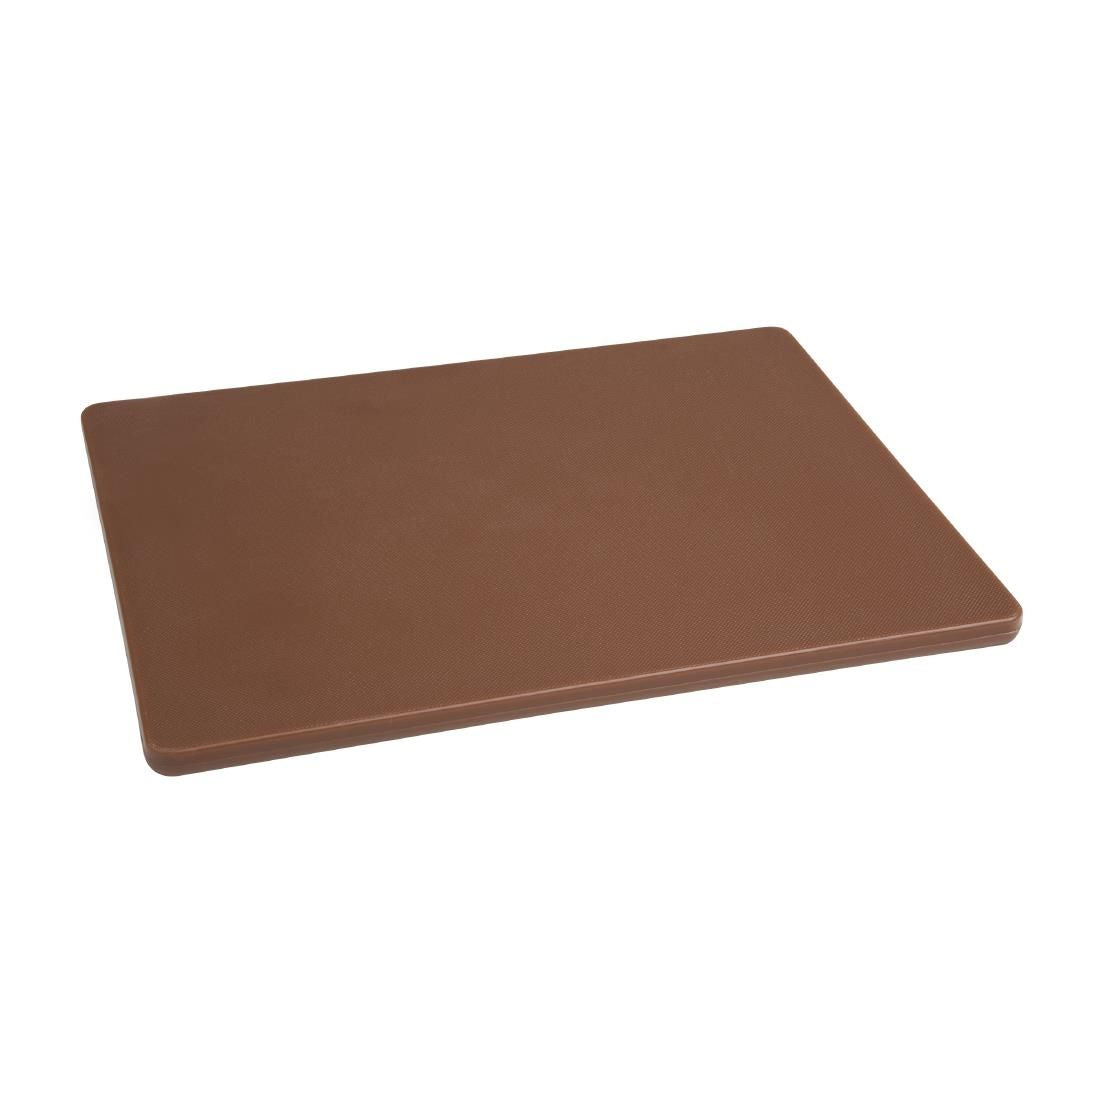 GH792 Hygiplas Low Density Brown Chopping Board Small JD Catering Equipment Solutions Ltd